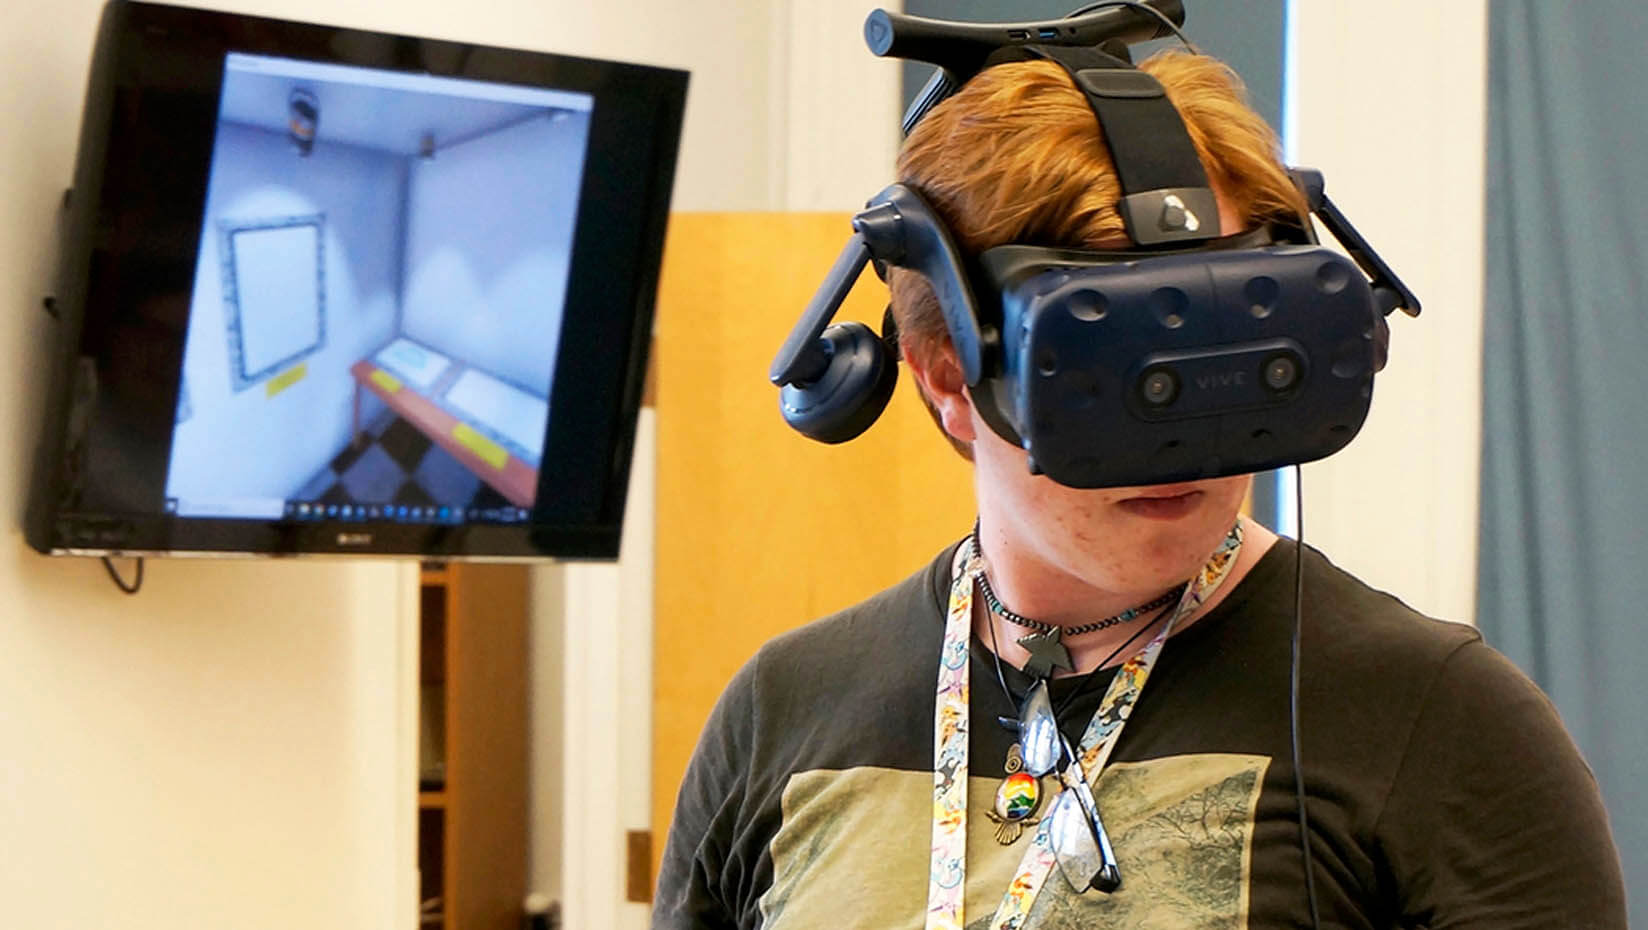 A photo of a student using a virtual reality headset